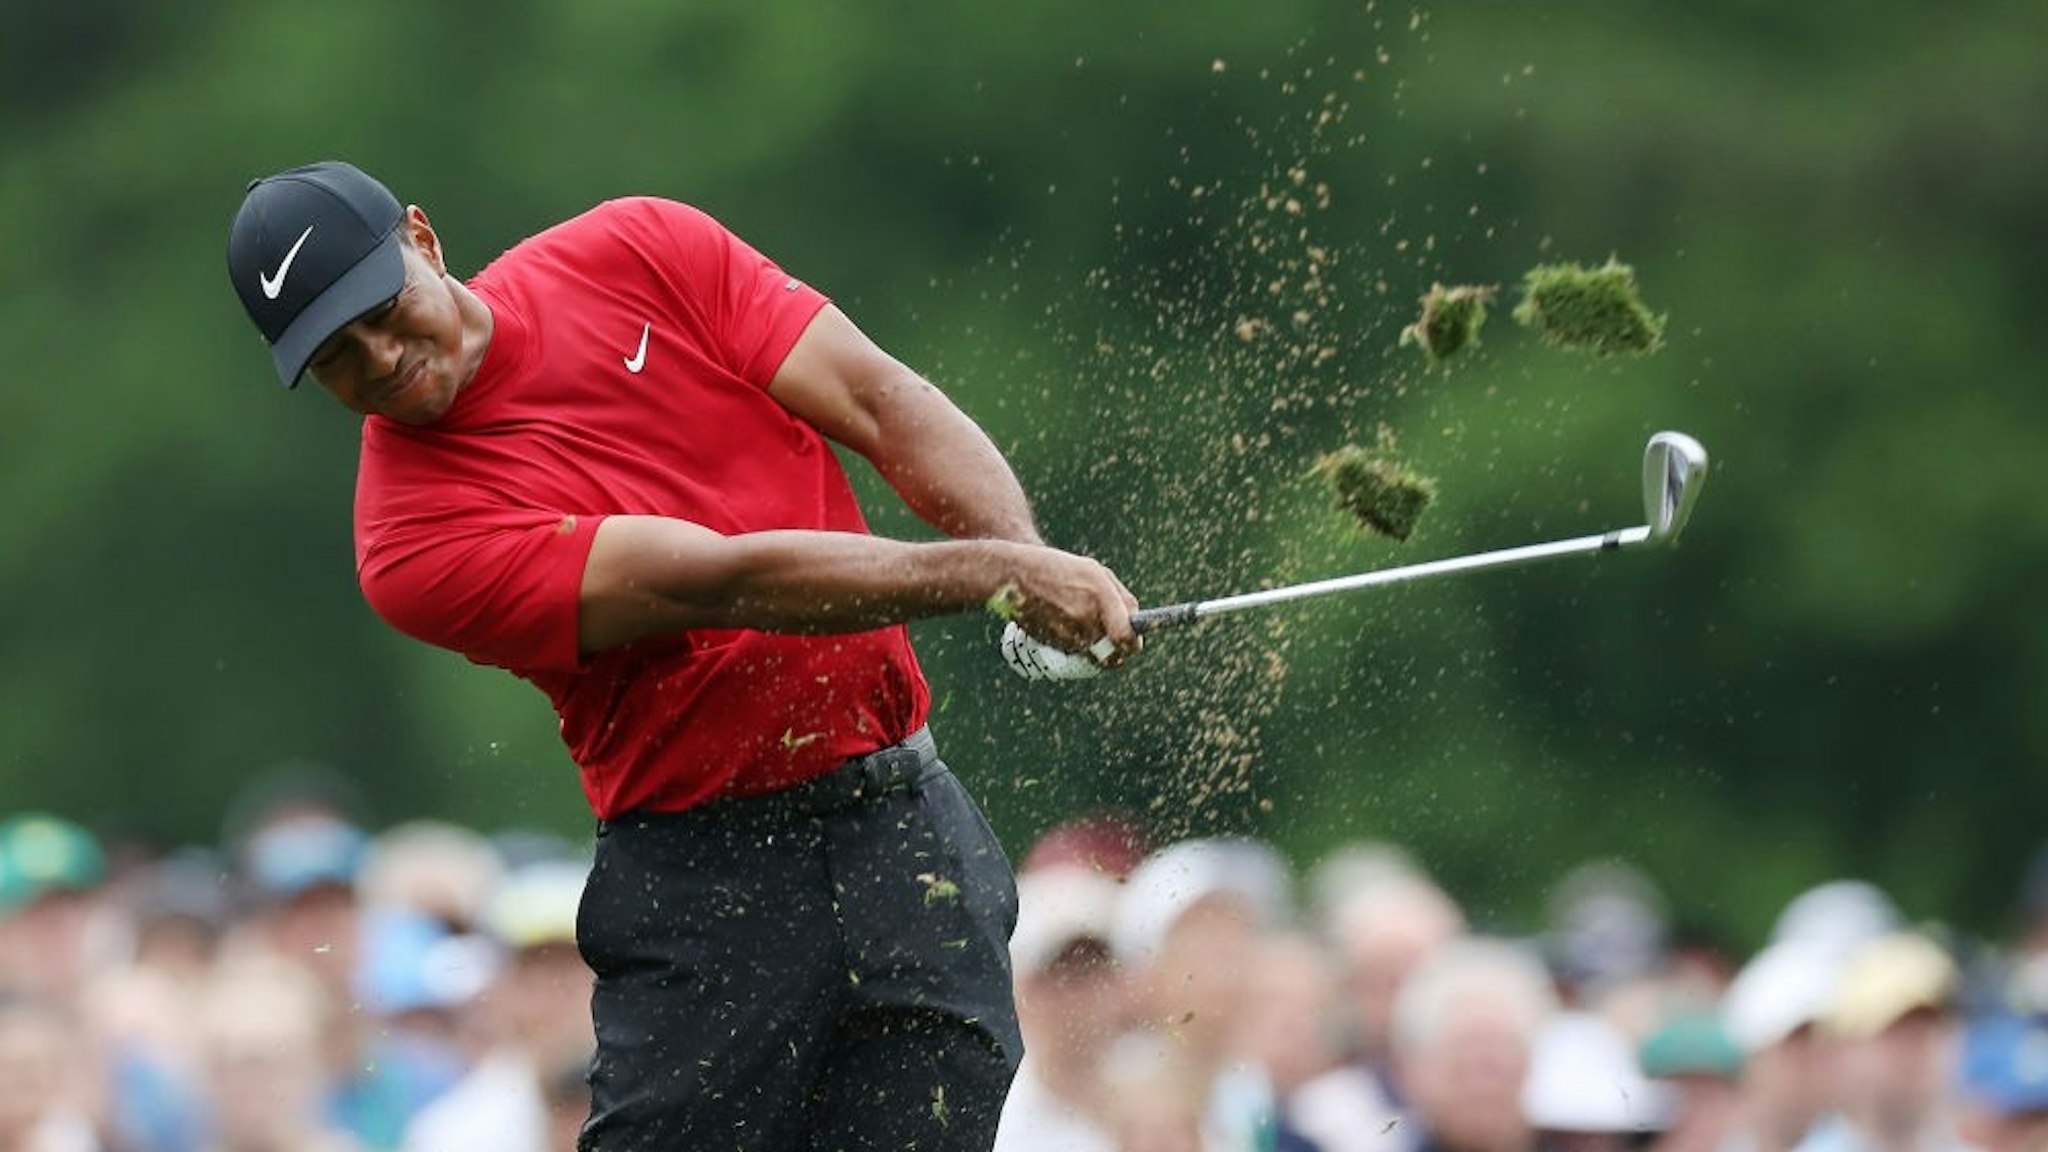 AUGUSTA, GEORGIA - APRIL 14: Tiger Woods of the United States plays a shot from the 12th tee during the final round of the Masters at Augusta National Golf Club on April 14, 2019 in Augusta, Georgia. (Photo by